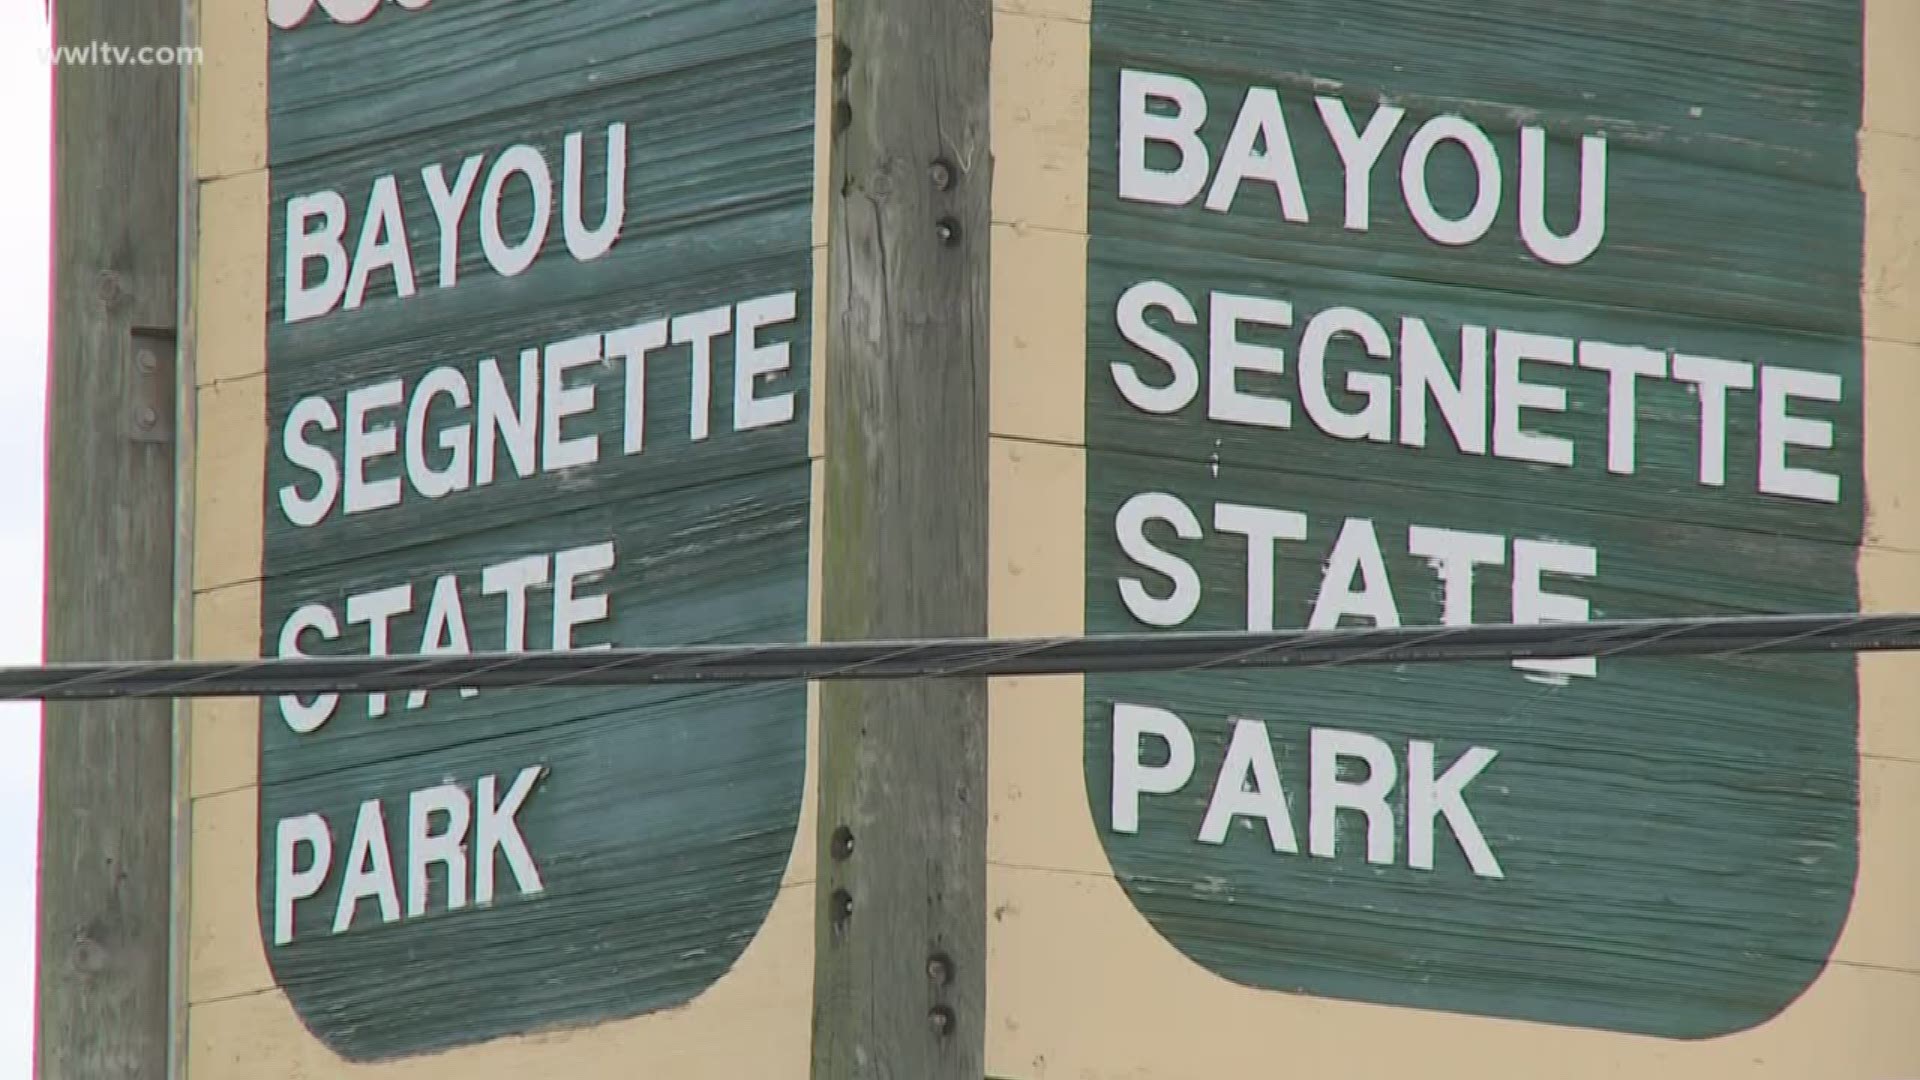 Visitors at the park Saturday would be evacuated, according to a statement released the same day by the office of state parks.